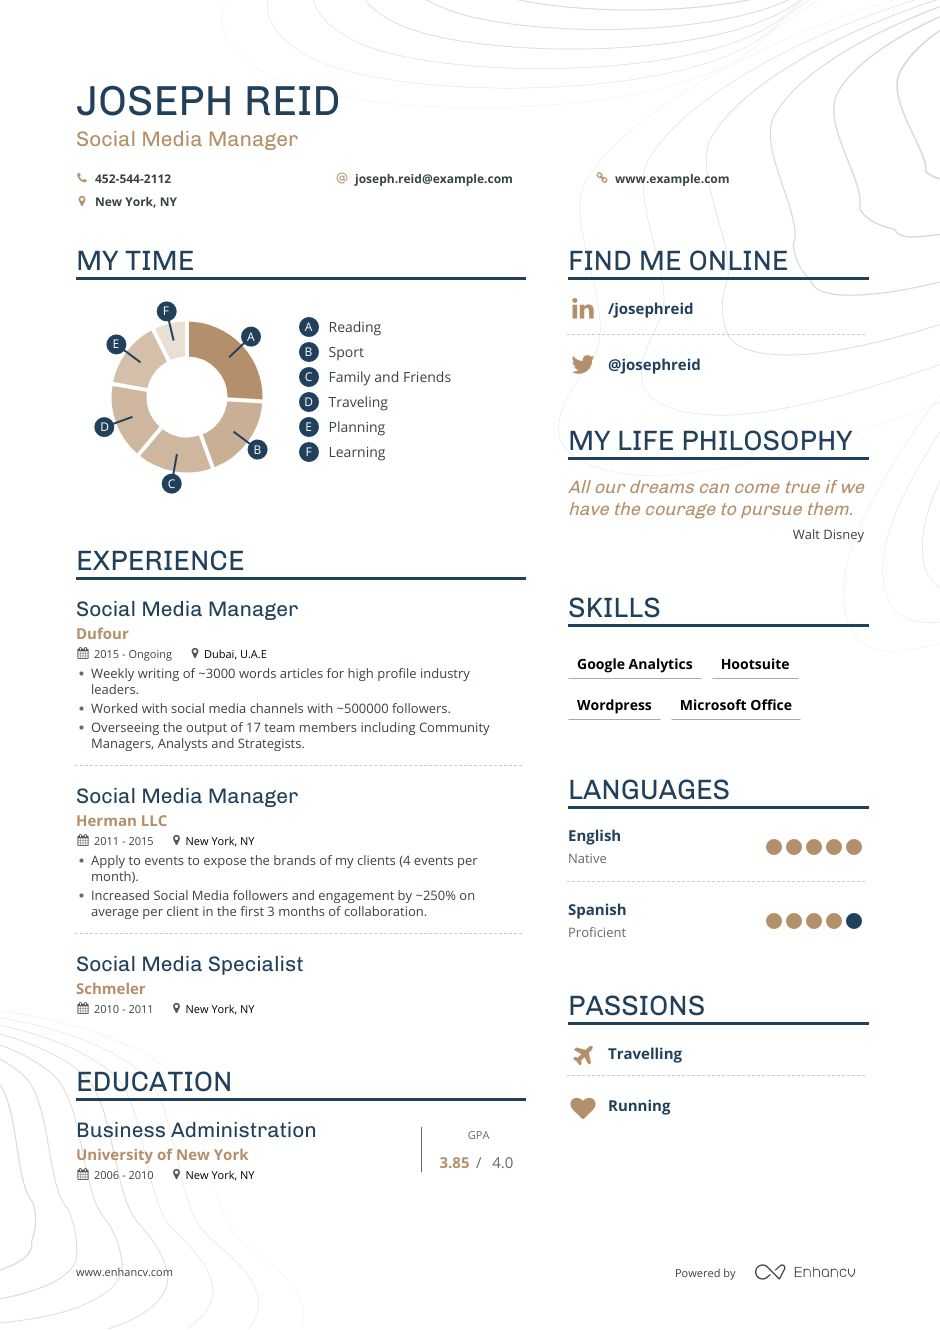 Social Media Manager Resume Examples, Skills, Templates & More for 2020